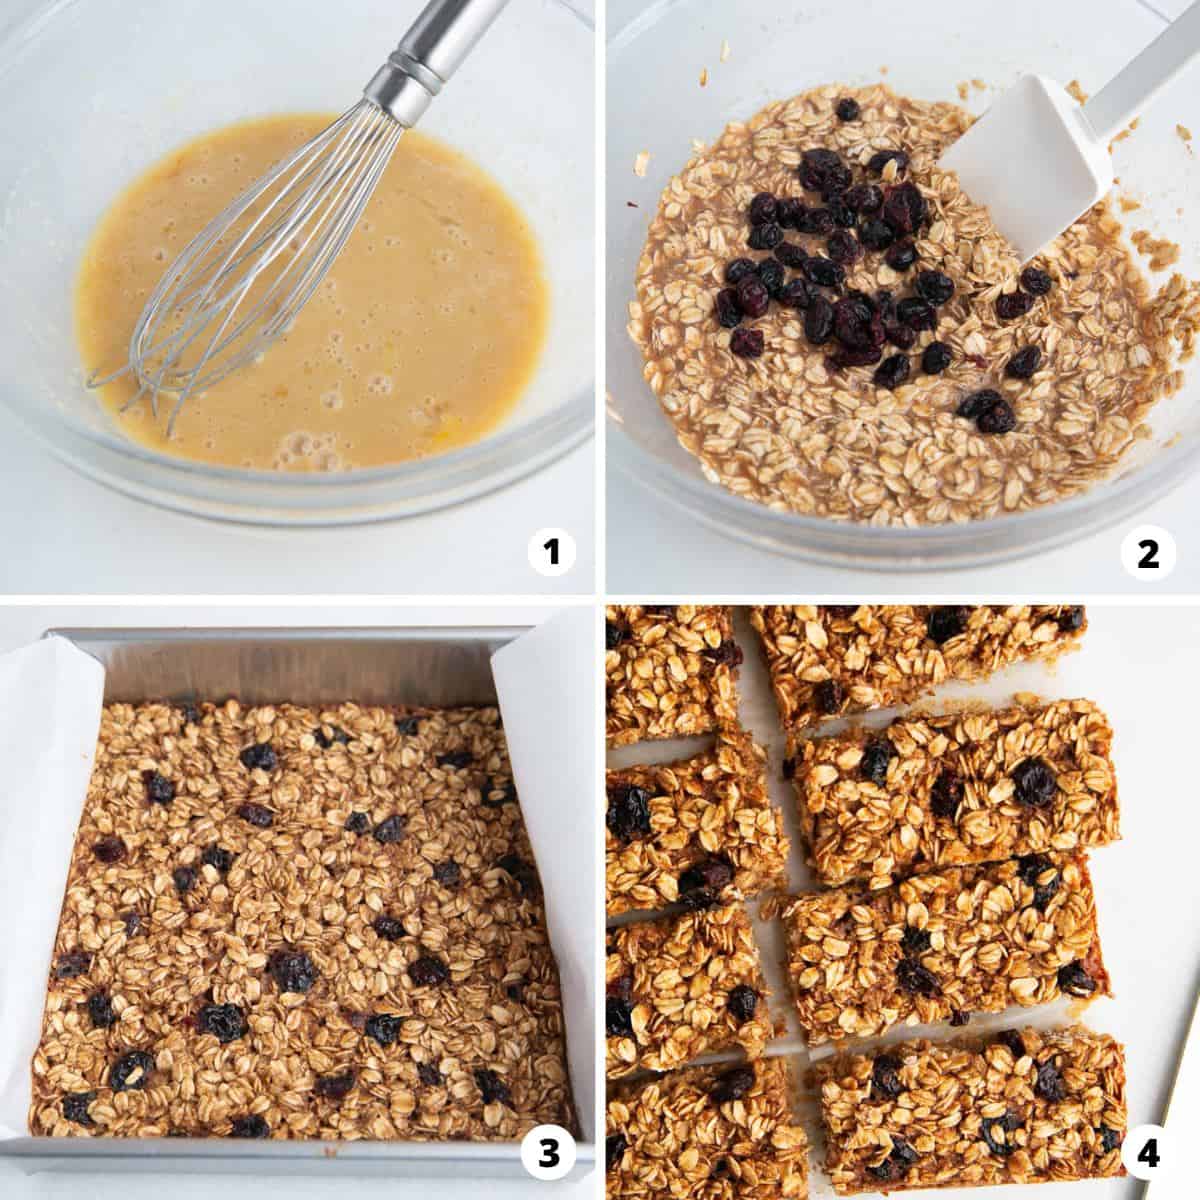 Showing how to make breakfast bars in a 4 step collage.